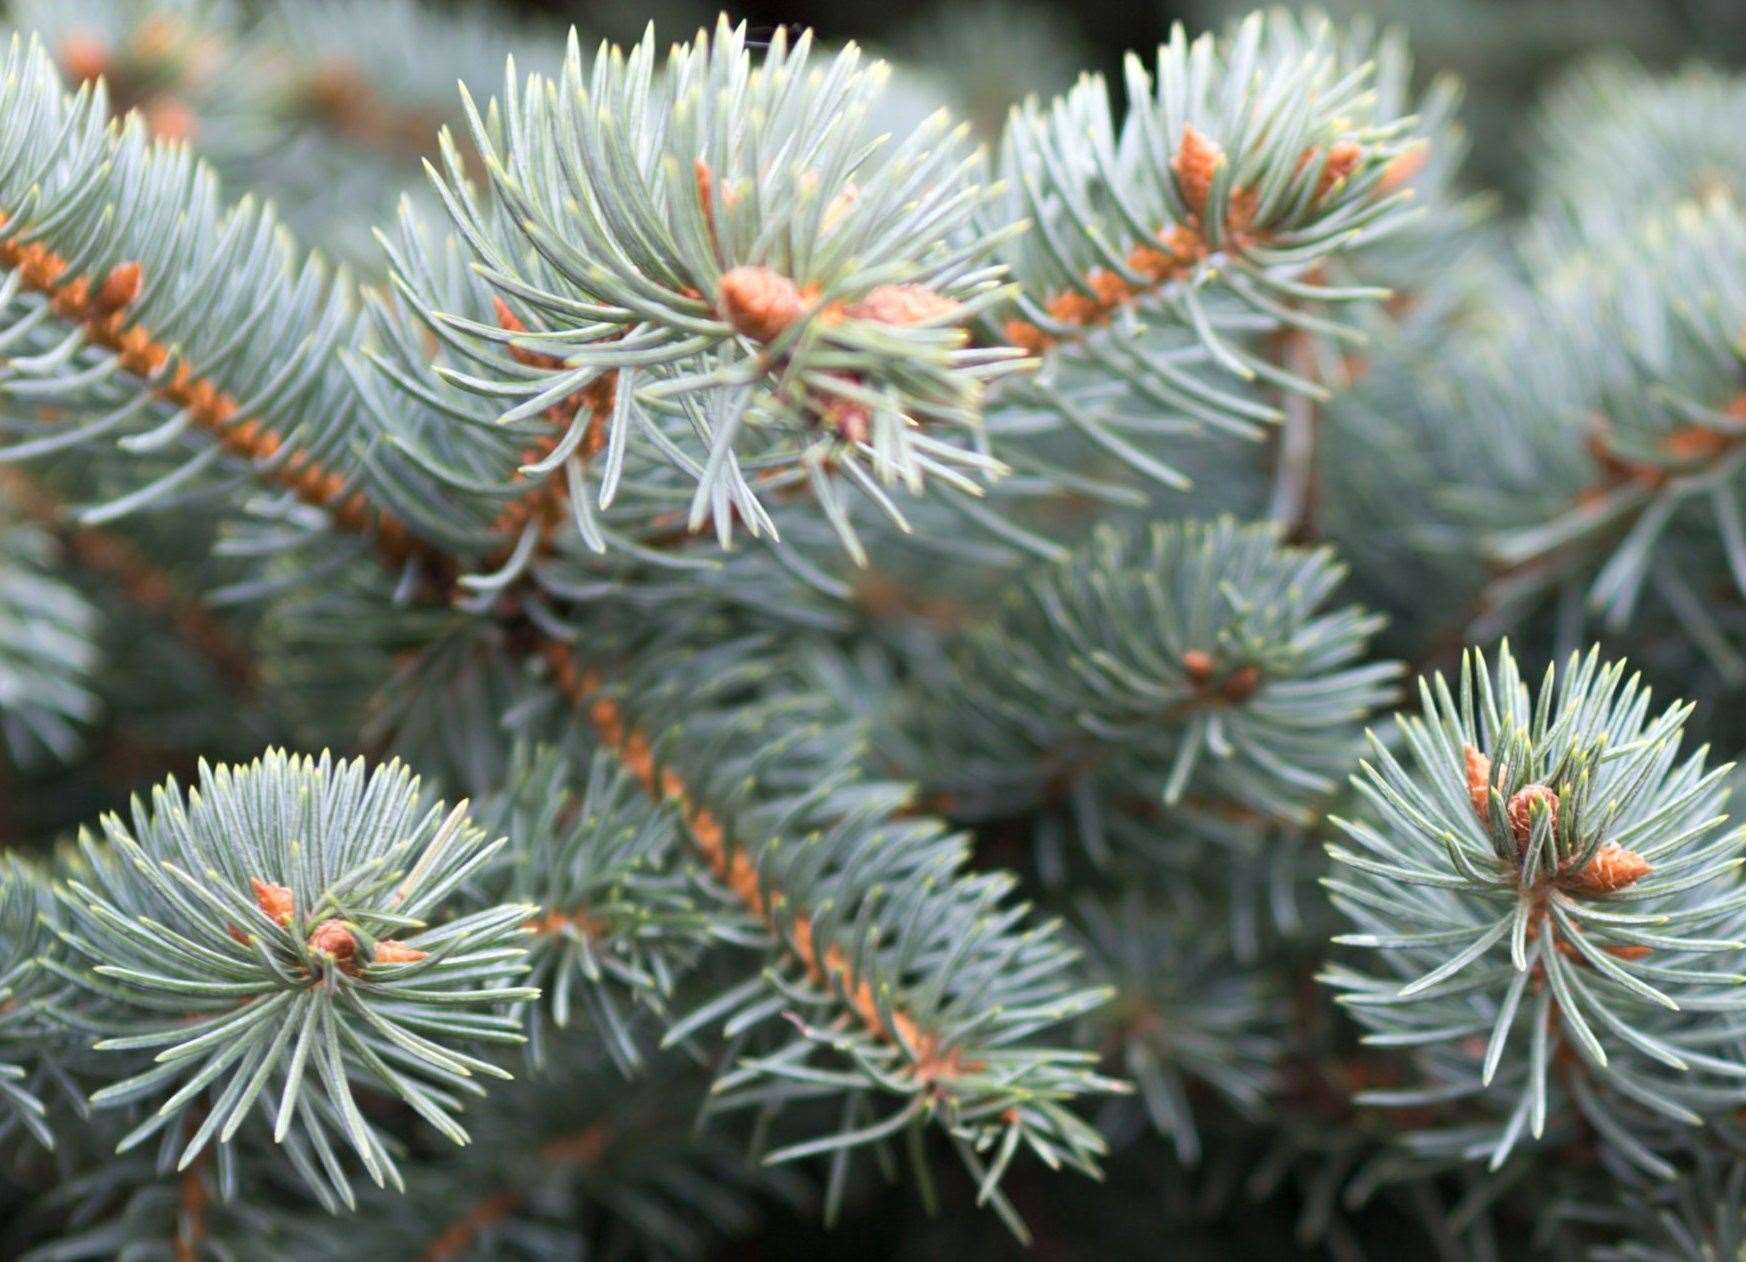 There is no proof pine needle tea can protect you against Covid